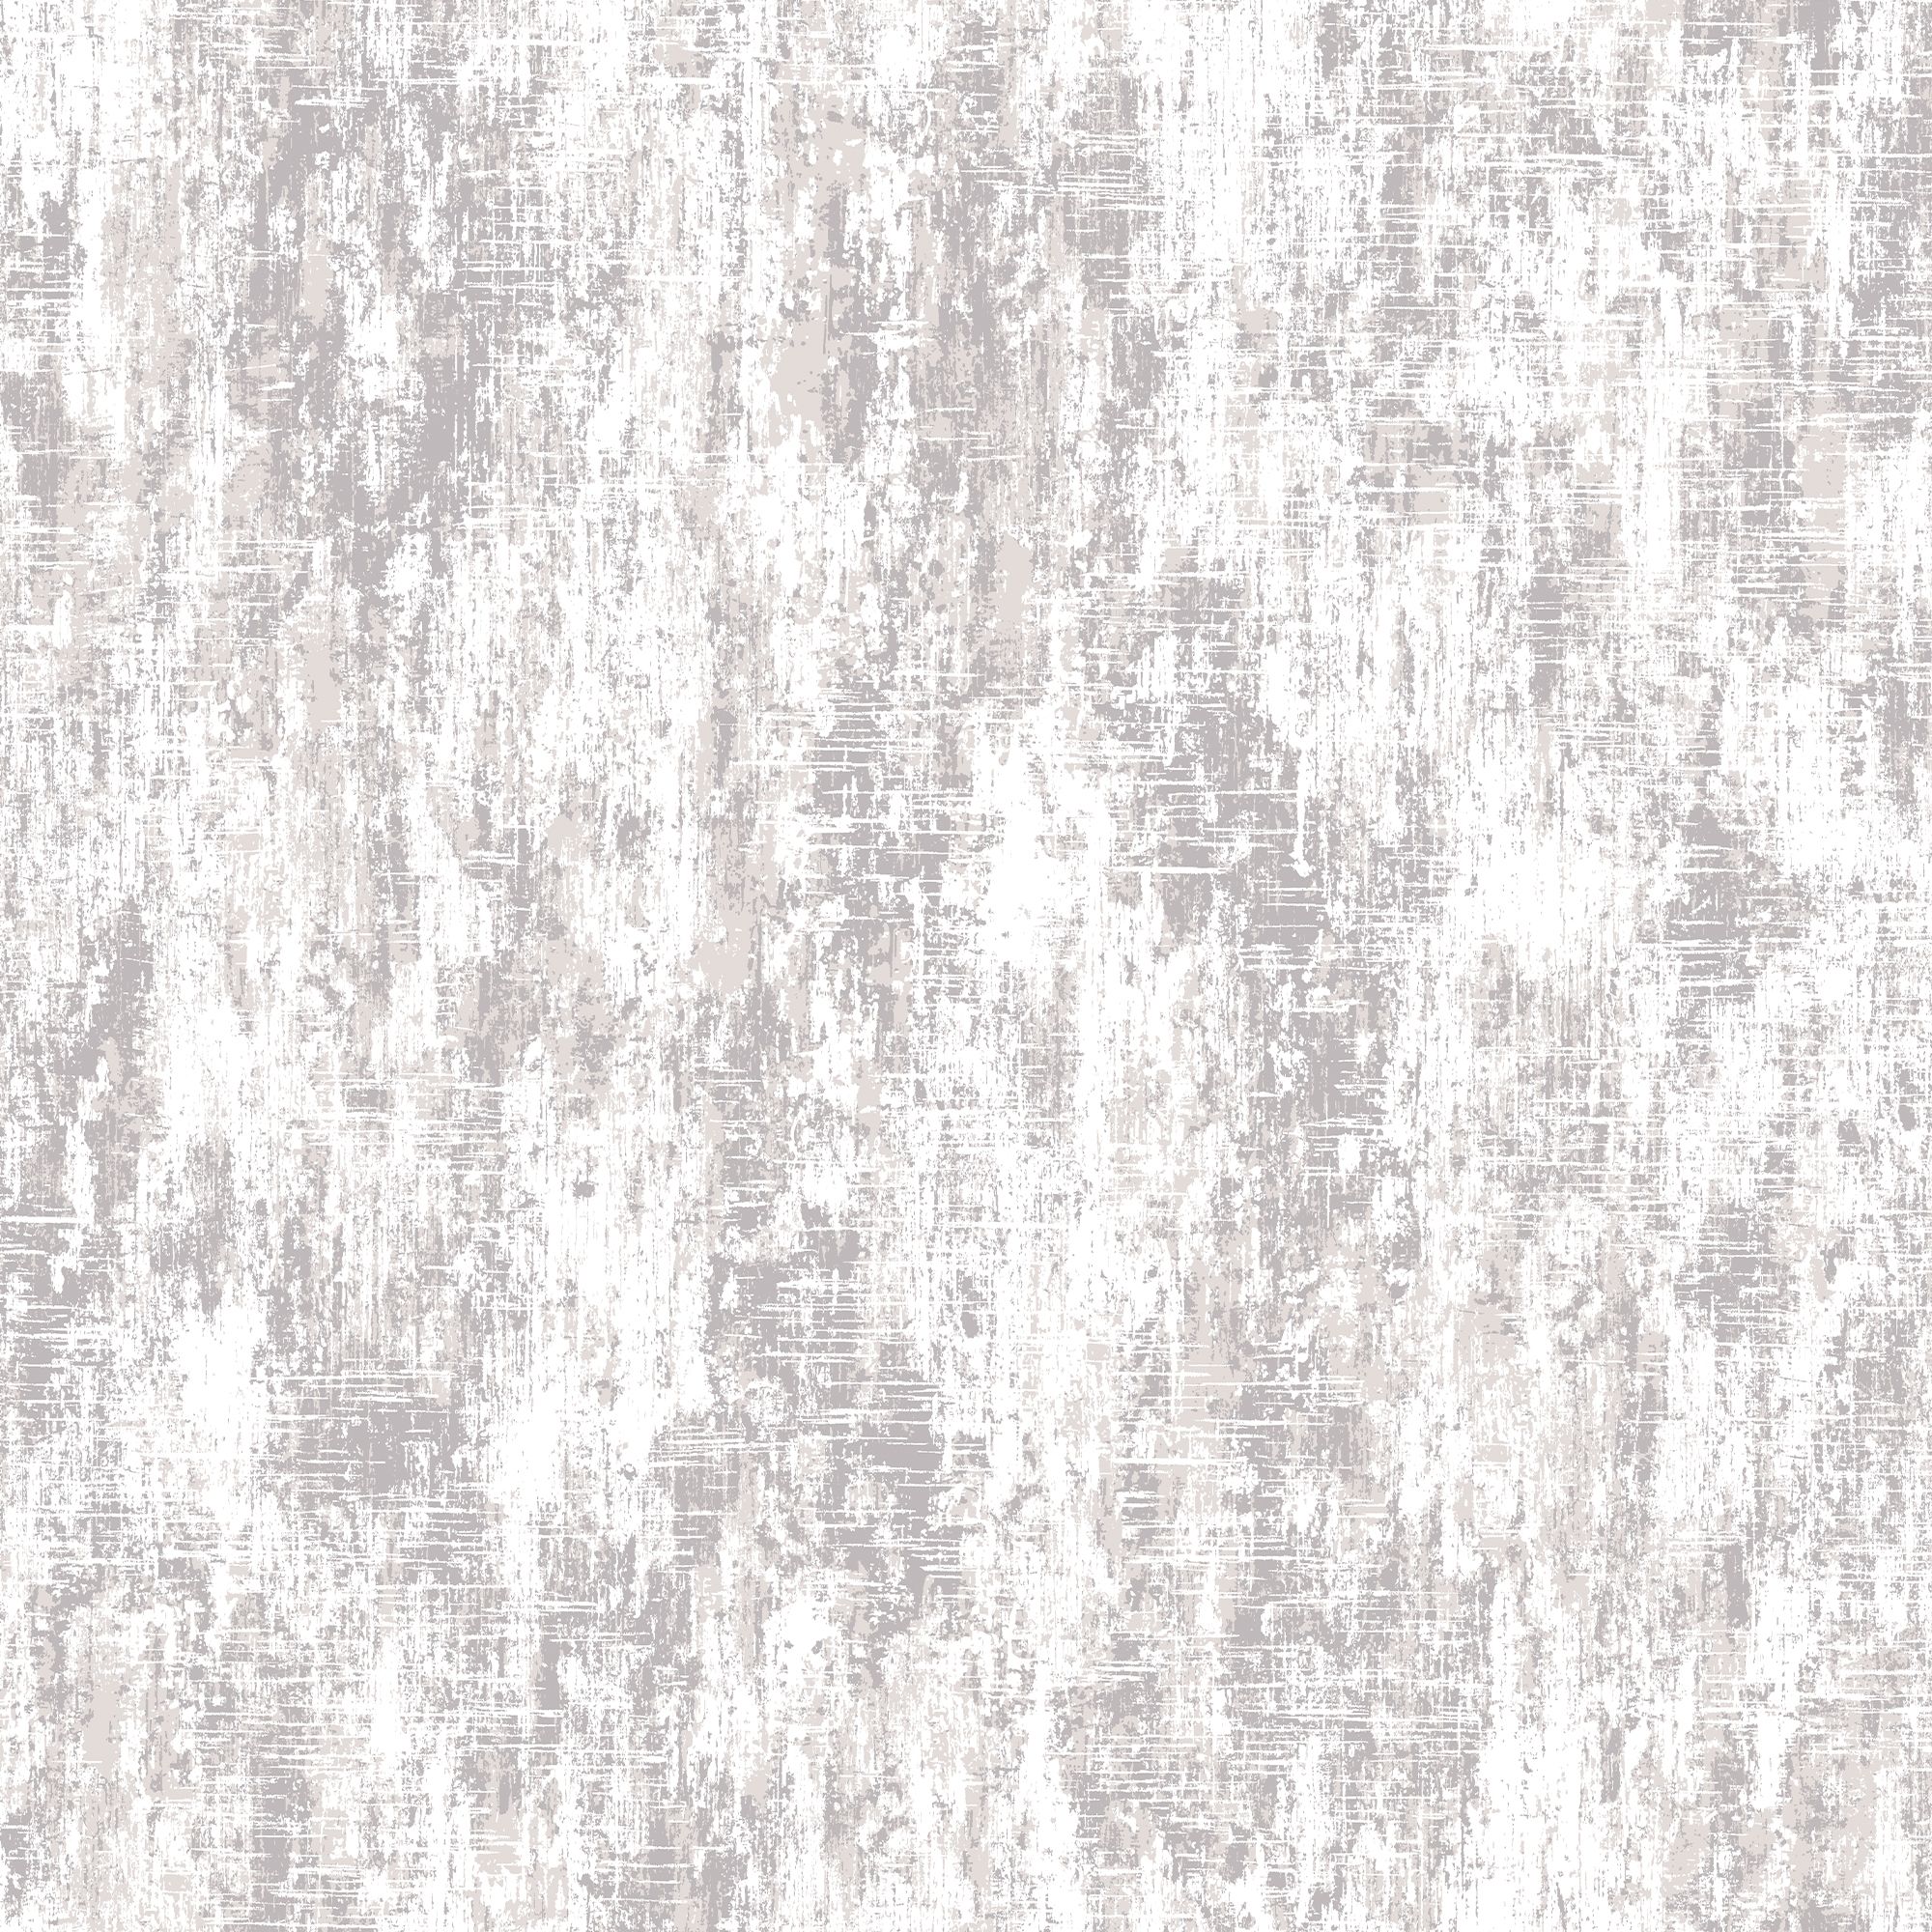 Laura Ashley Whinfell Moonbeam Metallic effect Industrial Smooth Wallpaper Sample